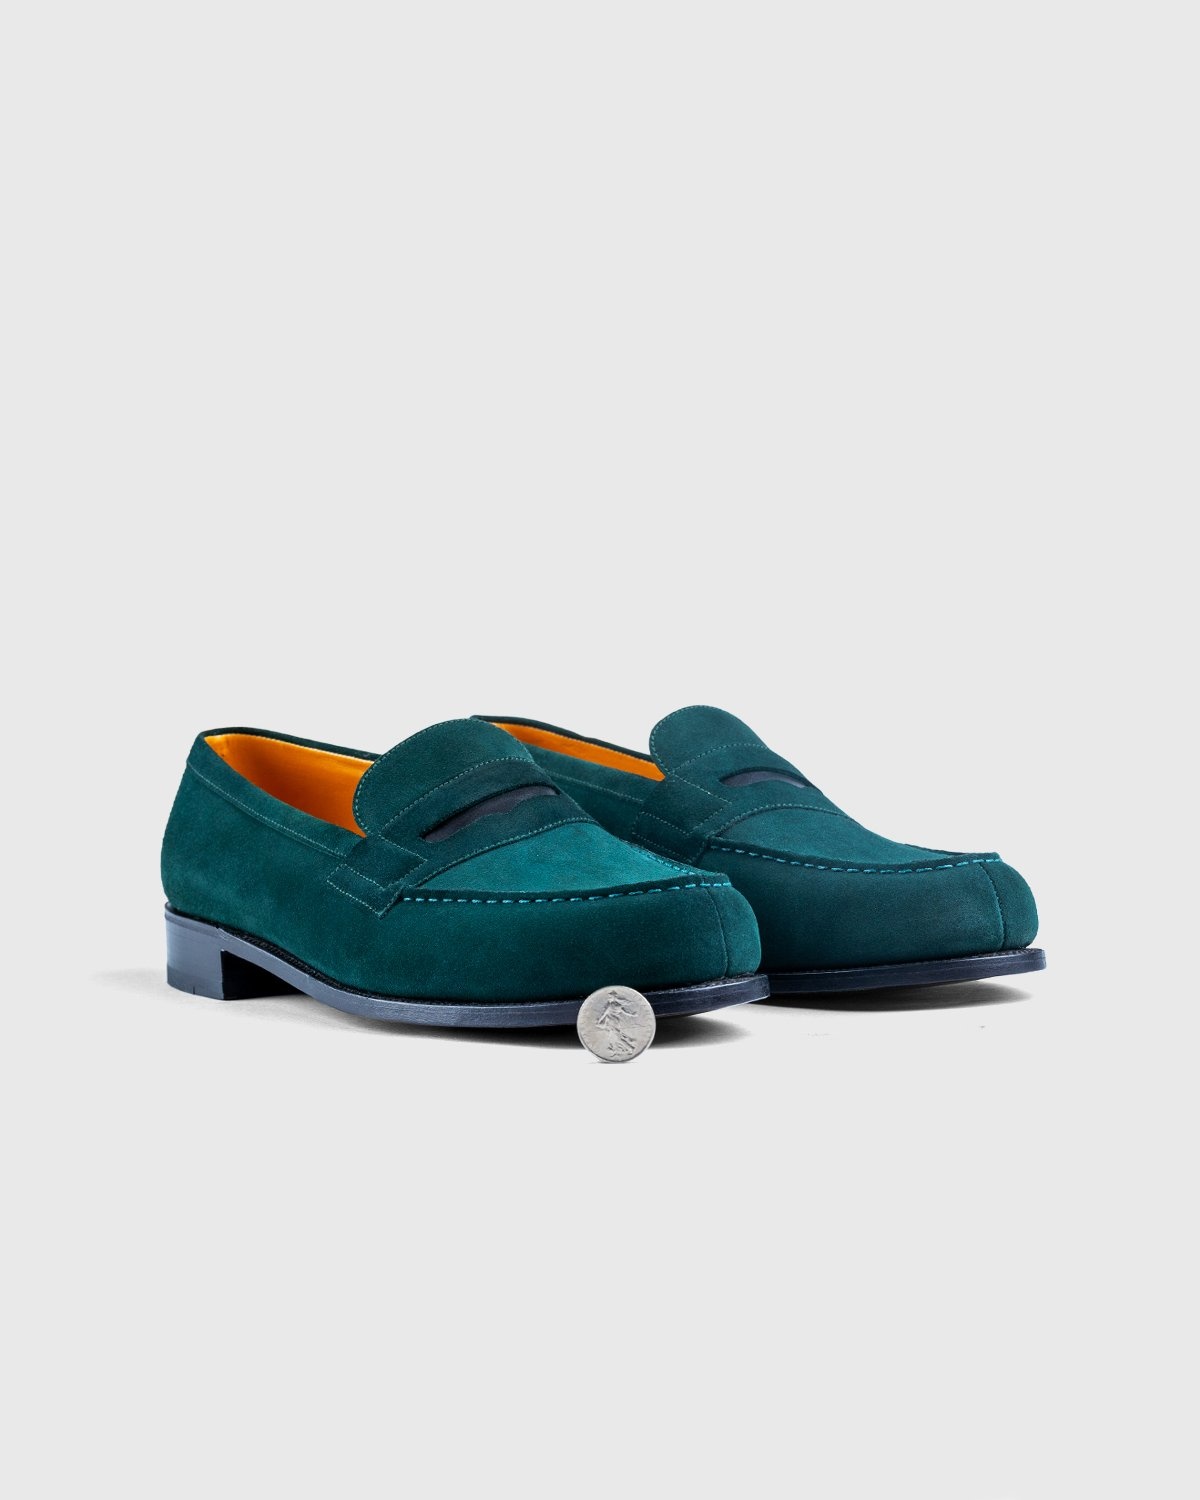 J.M. Weston x Highsnobiety – 180 'Penny' Loafer - Loafers - Green - Image 5